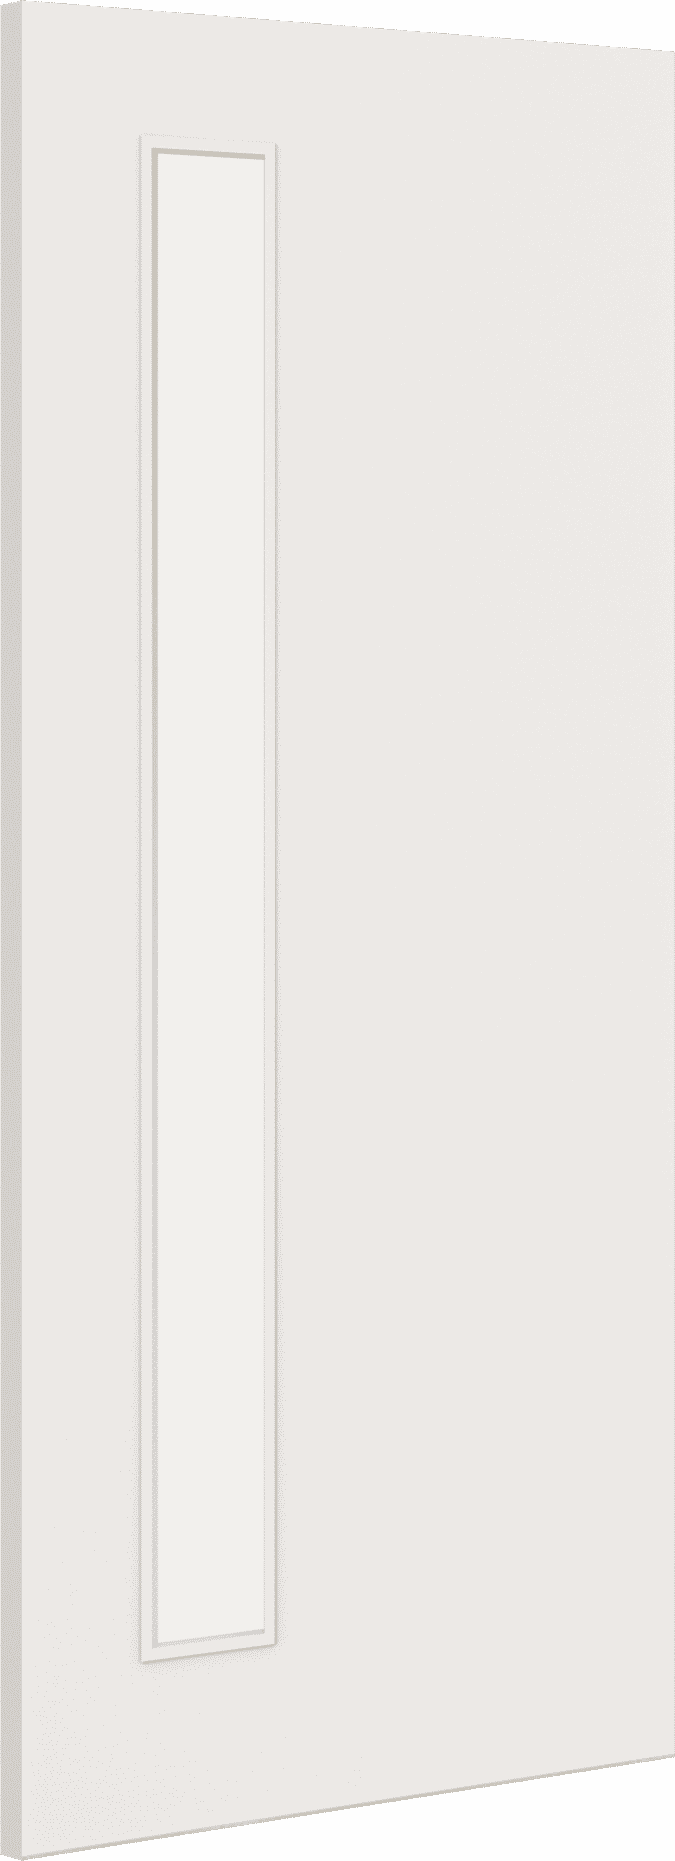 2040mm x 726mm x 44mm Architectural Paint Grade White 06 Frosted Glazed Fire Door Blank